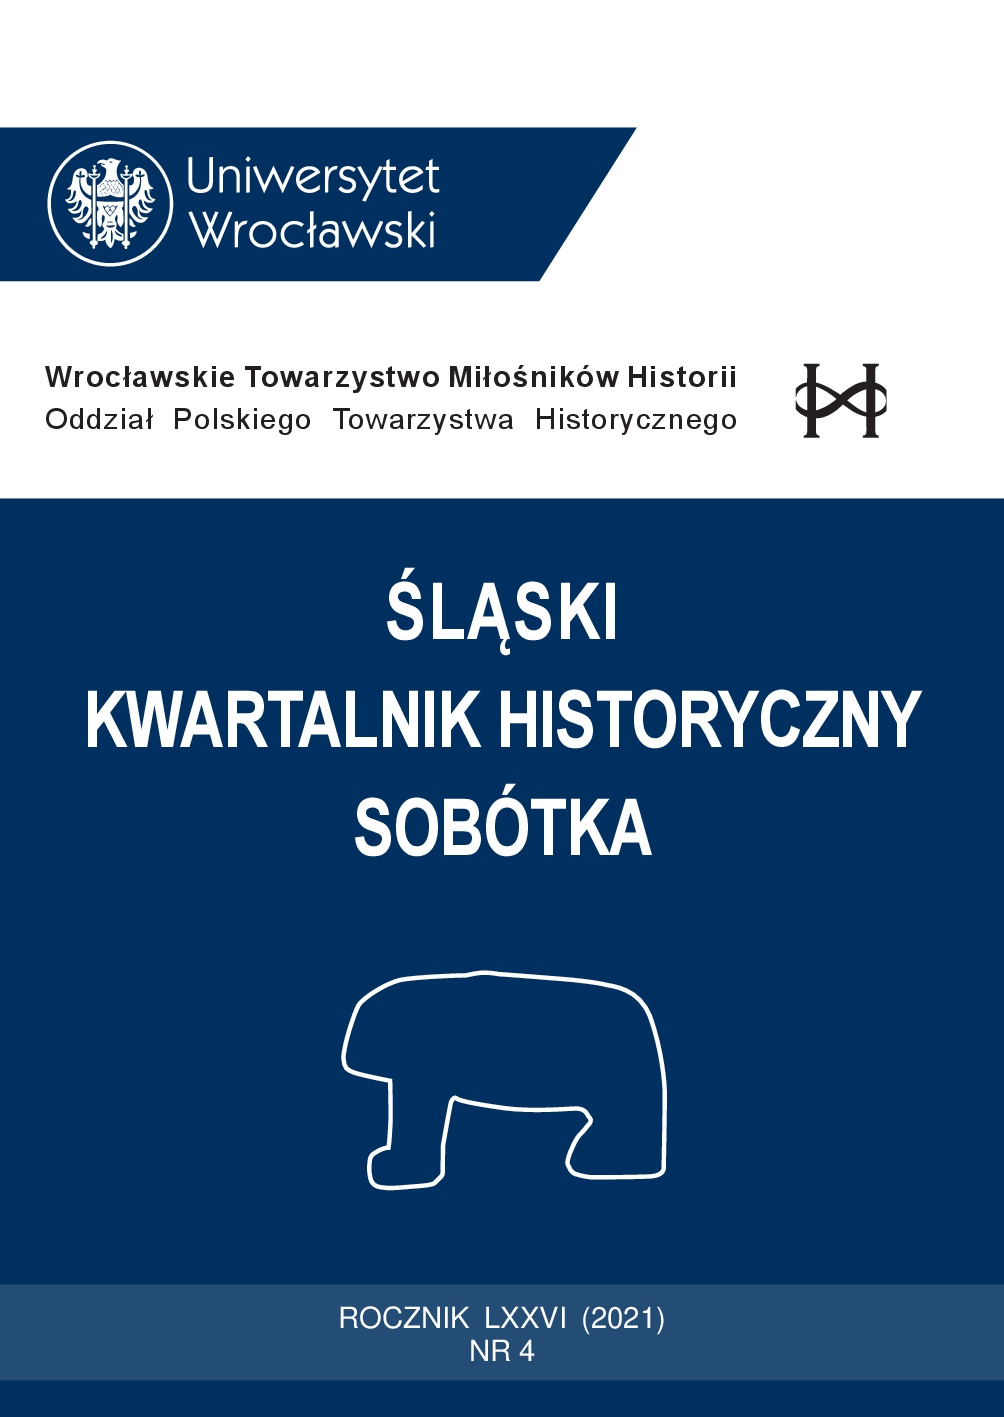 The latest publications on the history of Silesia Cover Image